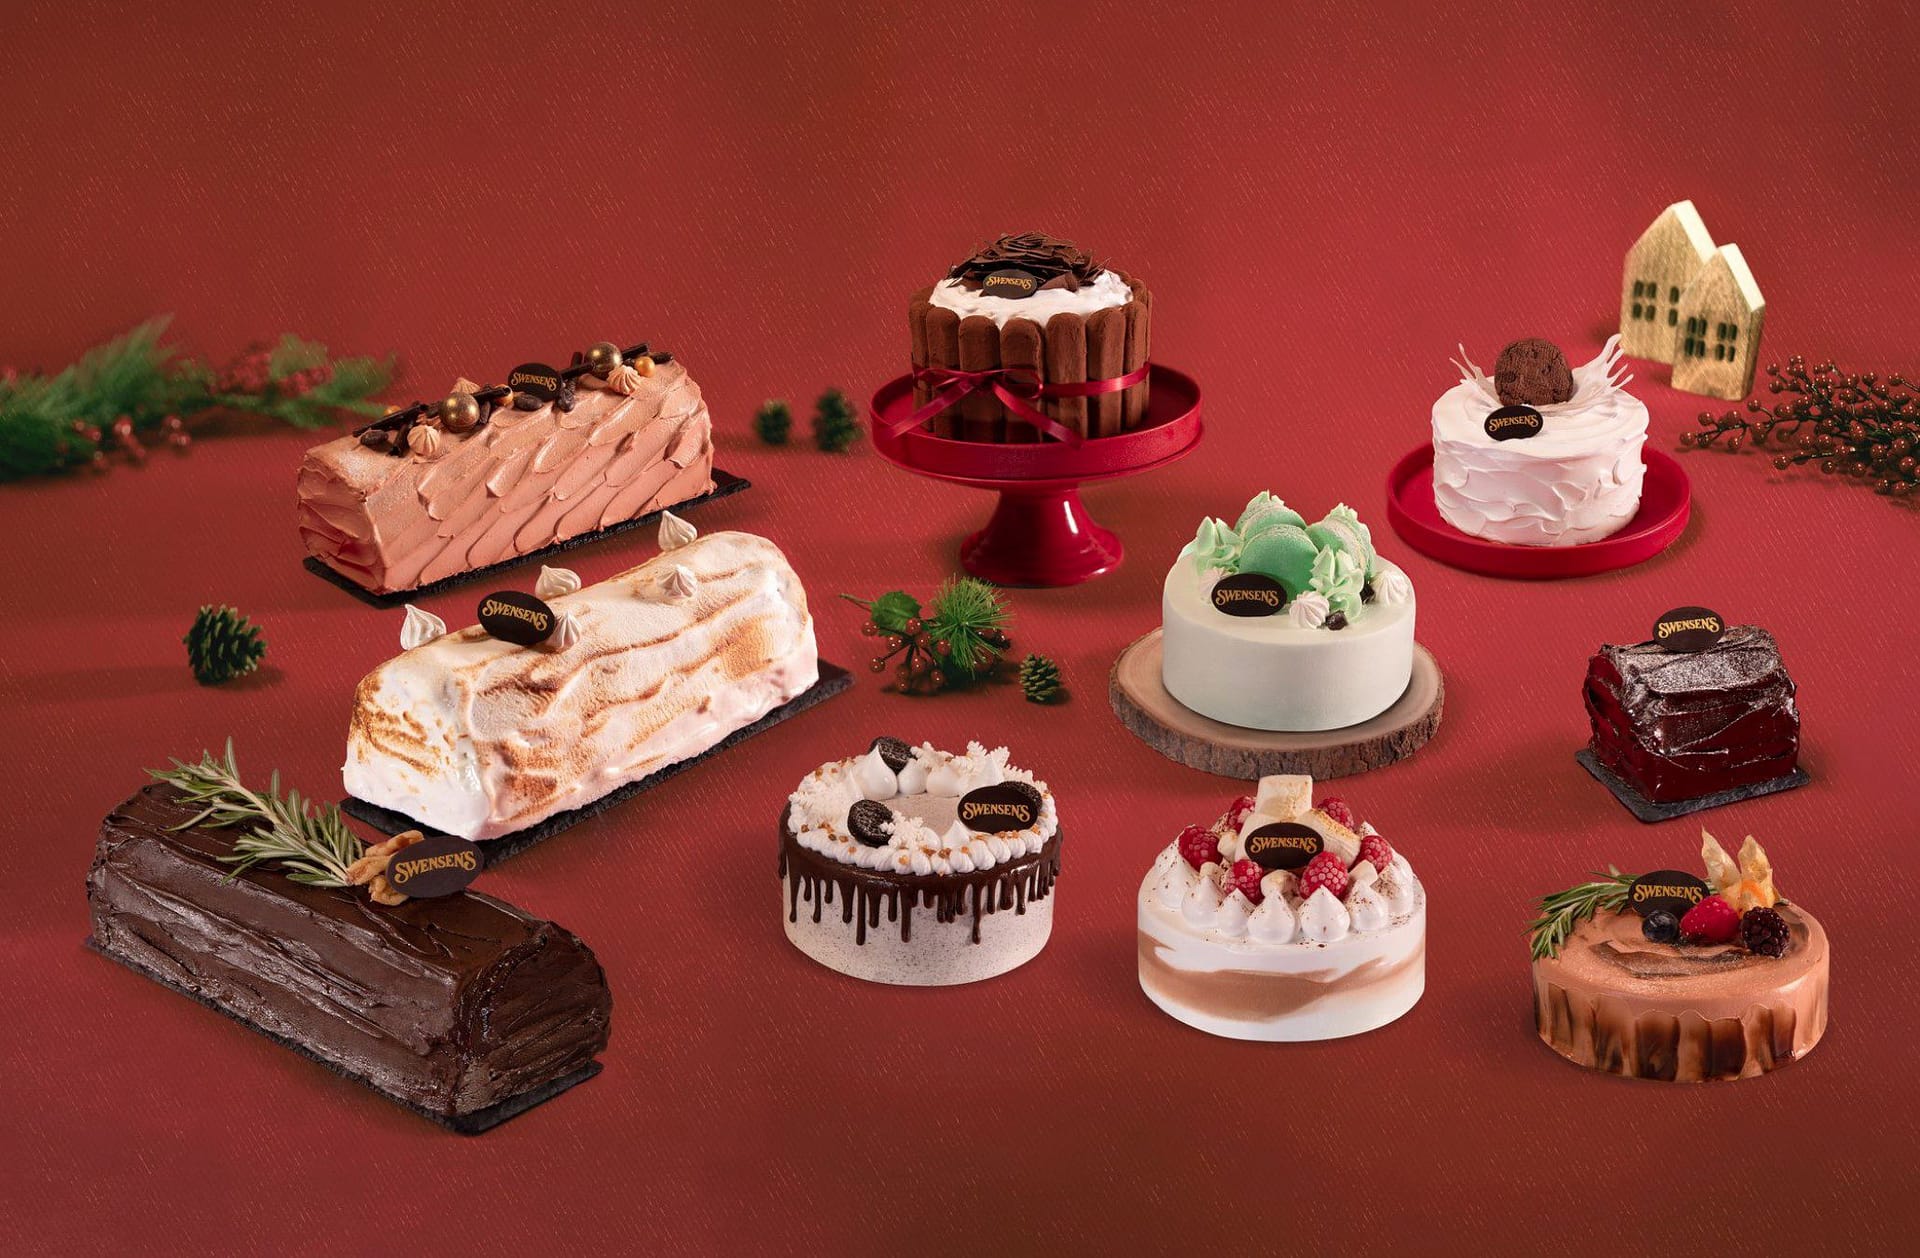 New Menu: Swensen's Unveils Festive Christmas Menu and Delectable Ice ...